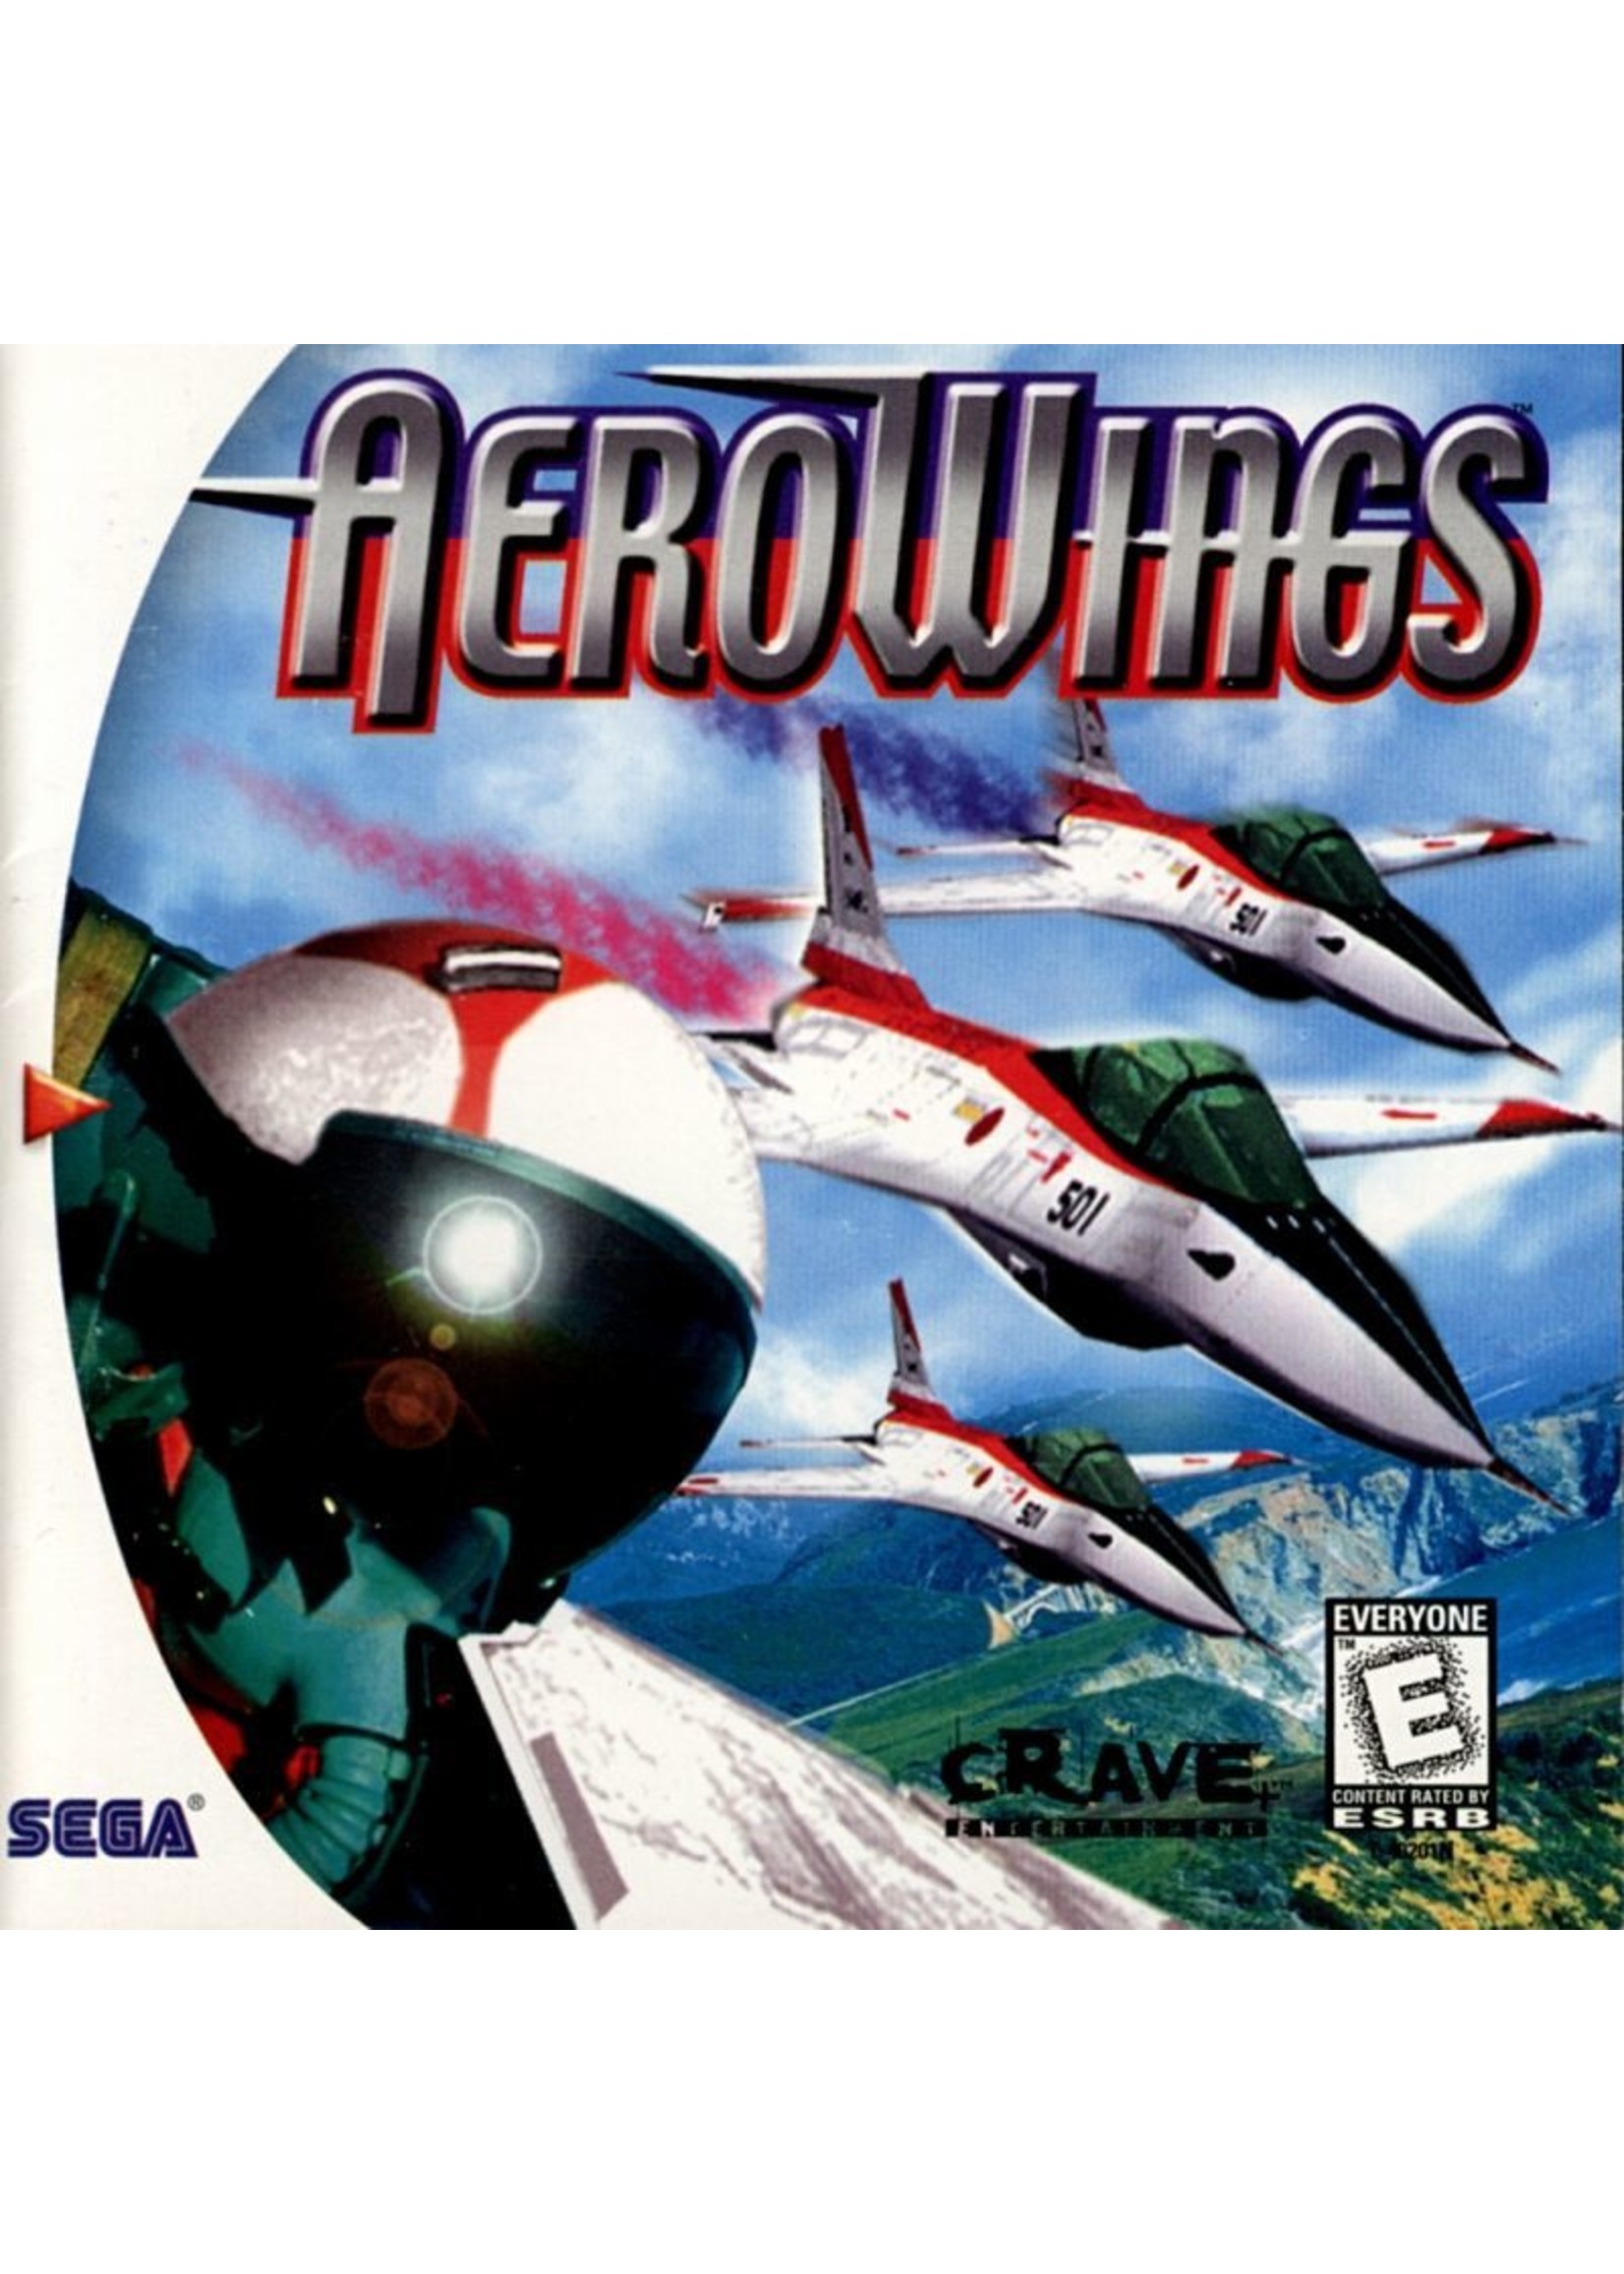 Sega Dreamcast AeroWings - Disc Only